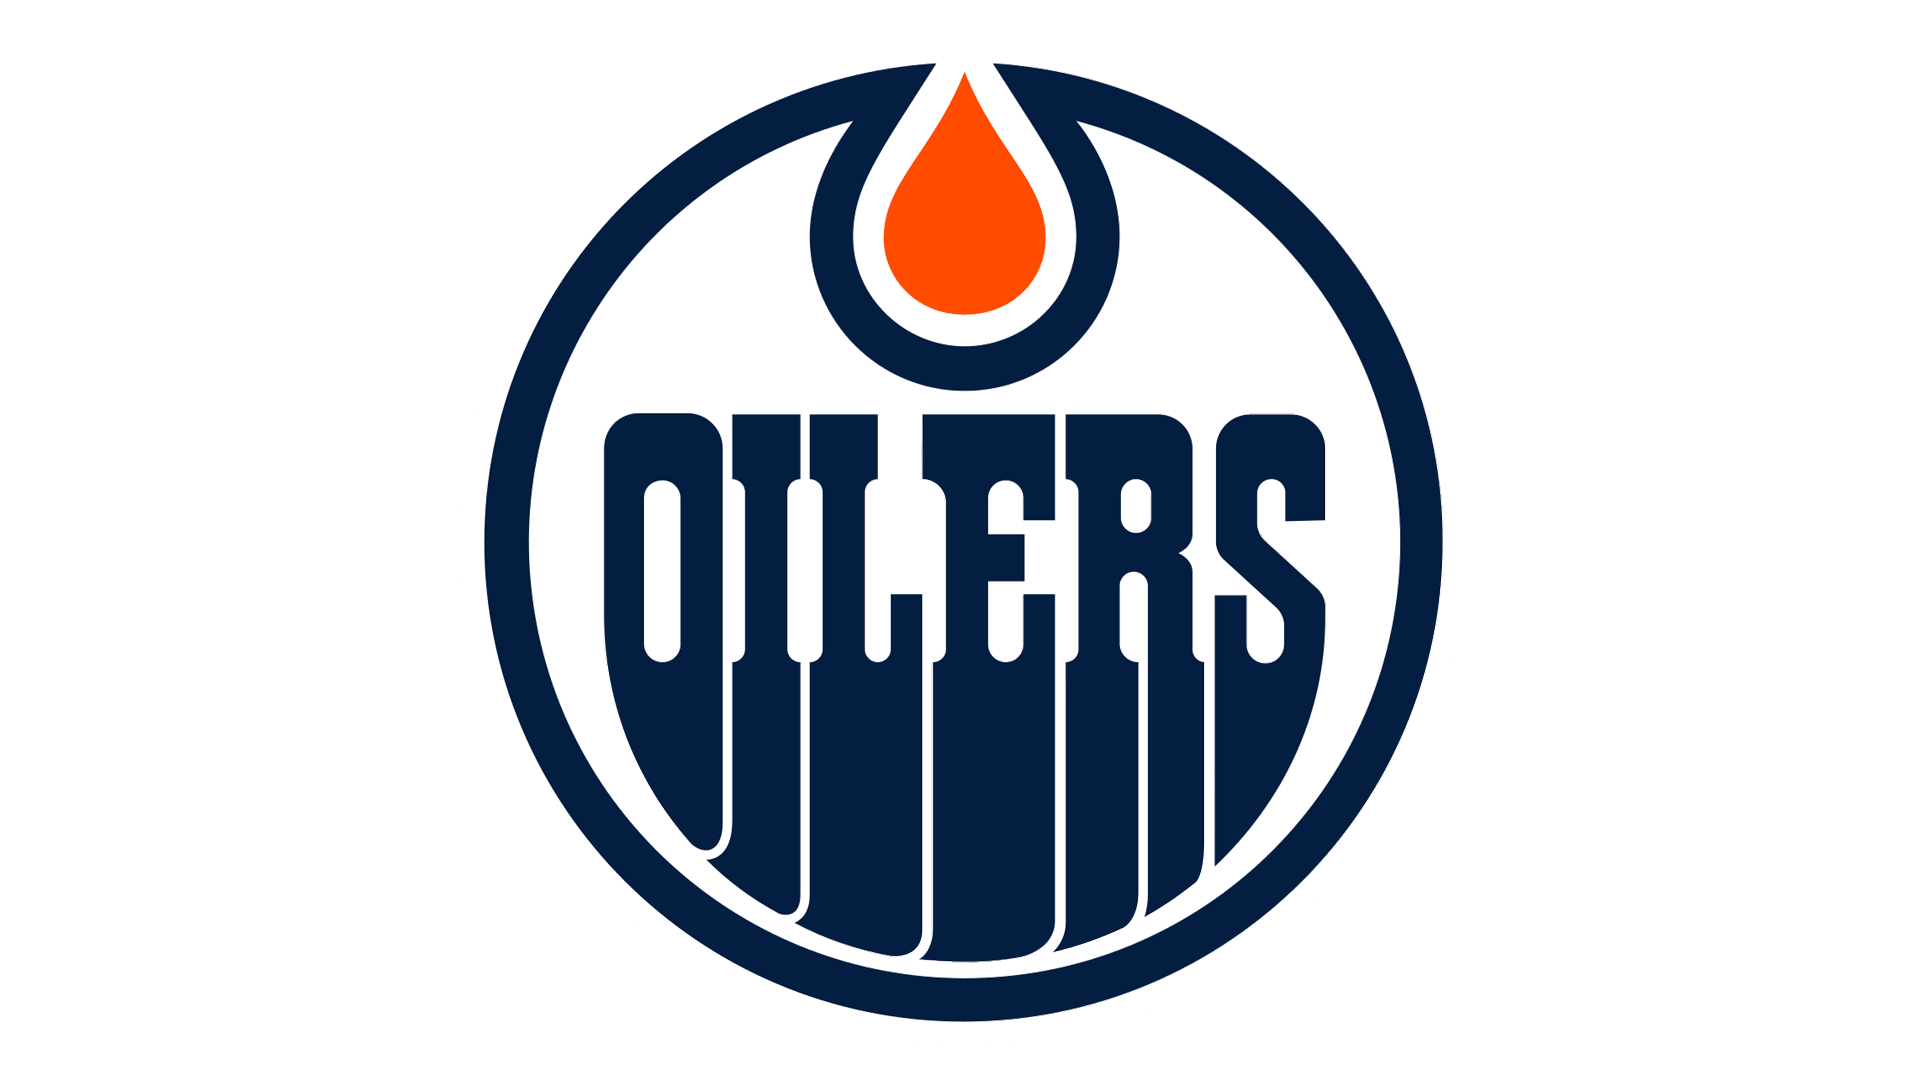 Edmonton Oilers Logo - Edmonton Oilers Logo, Edmonton Oilers Symbol, Meaning, History and ...